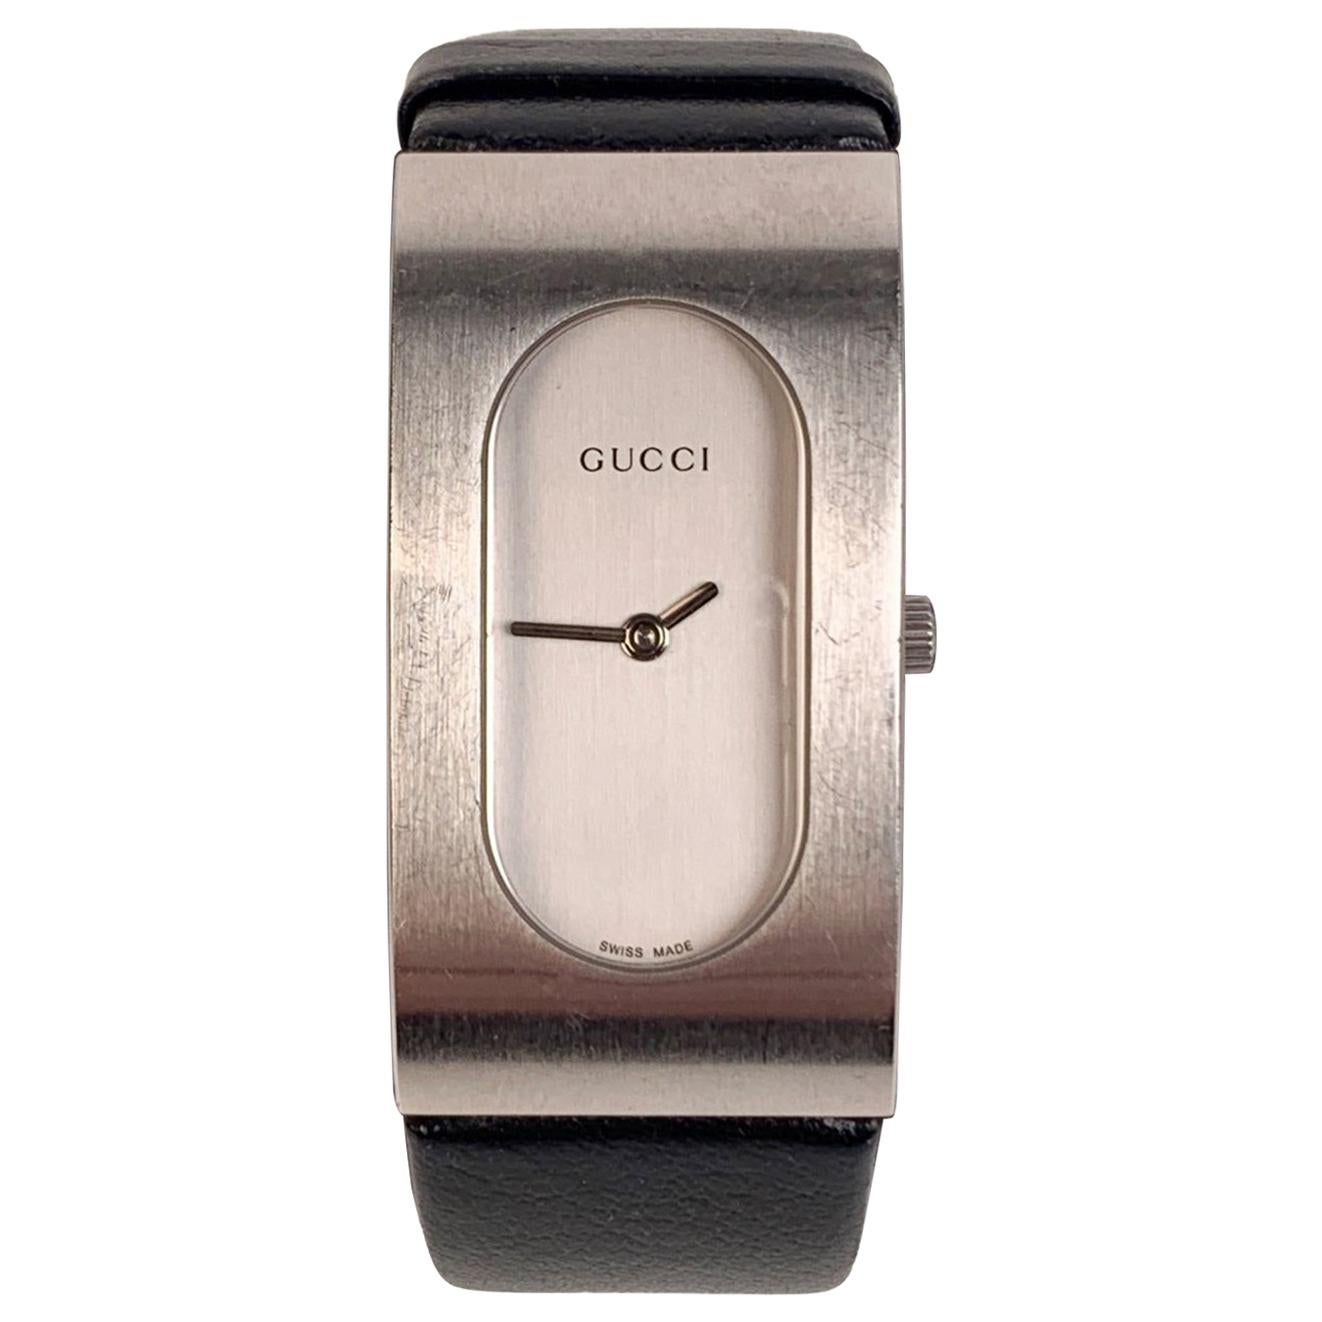 Gucci Stainless Steel Mod 2400 L Wrist Watch Black Leather